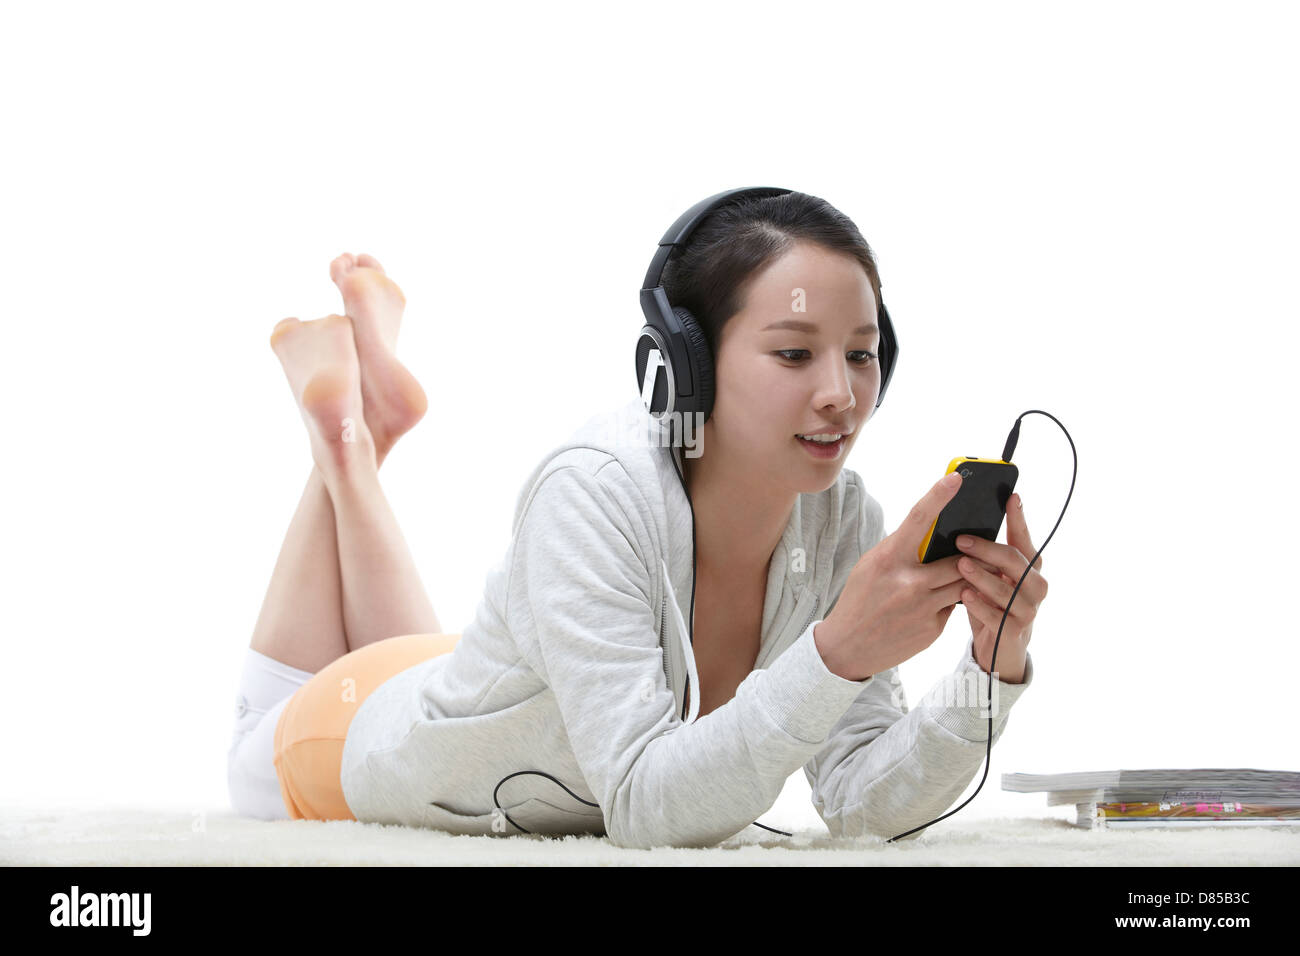 young woman lying on her front listening to music. Stock Photo